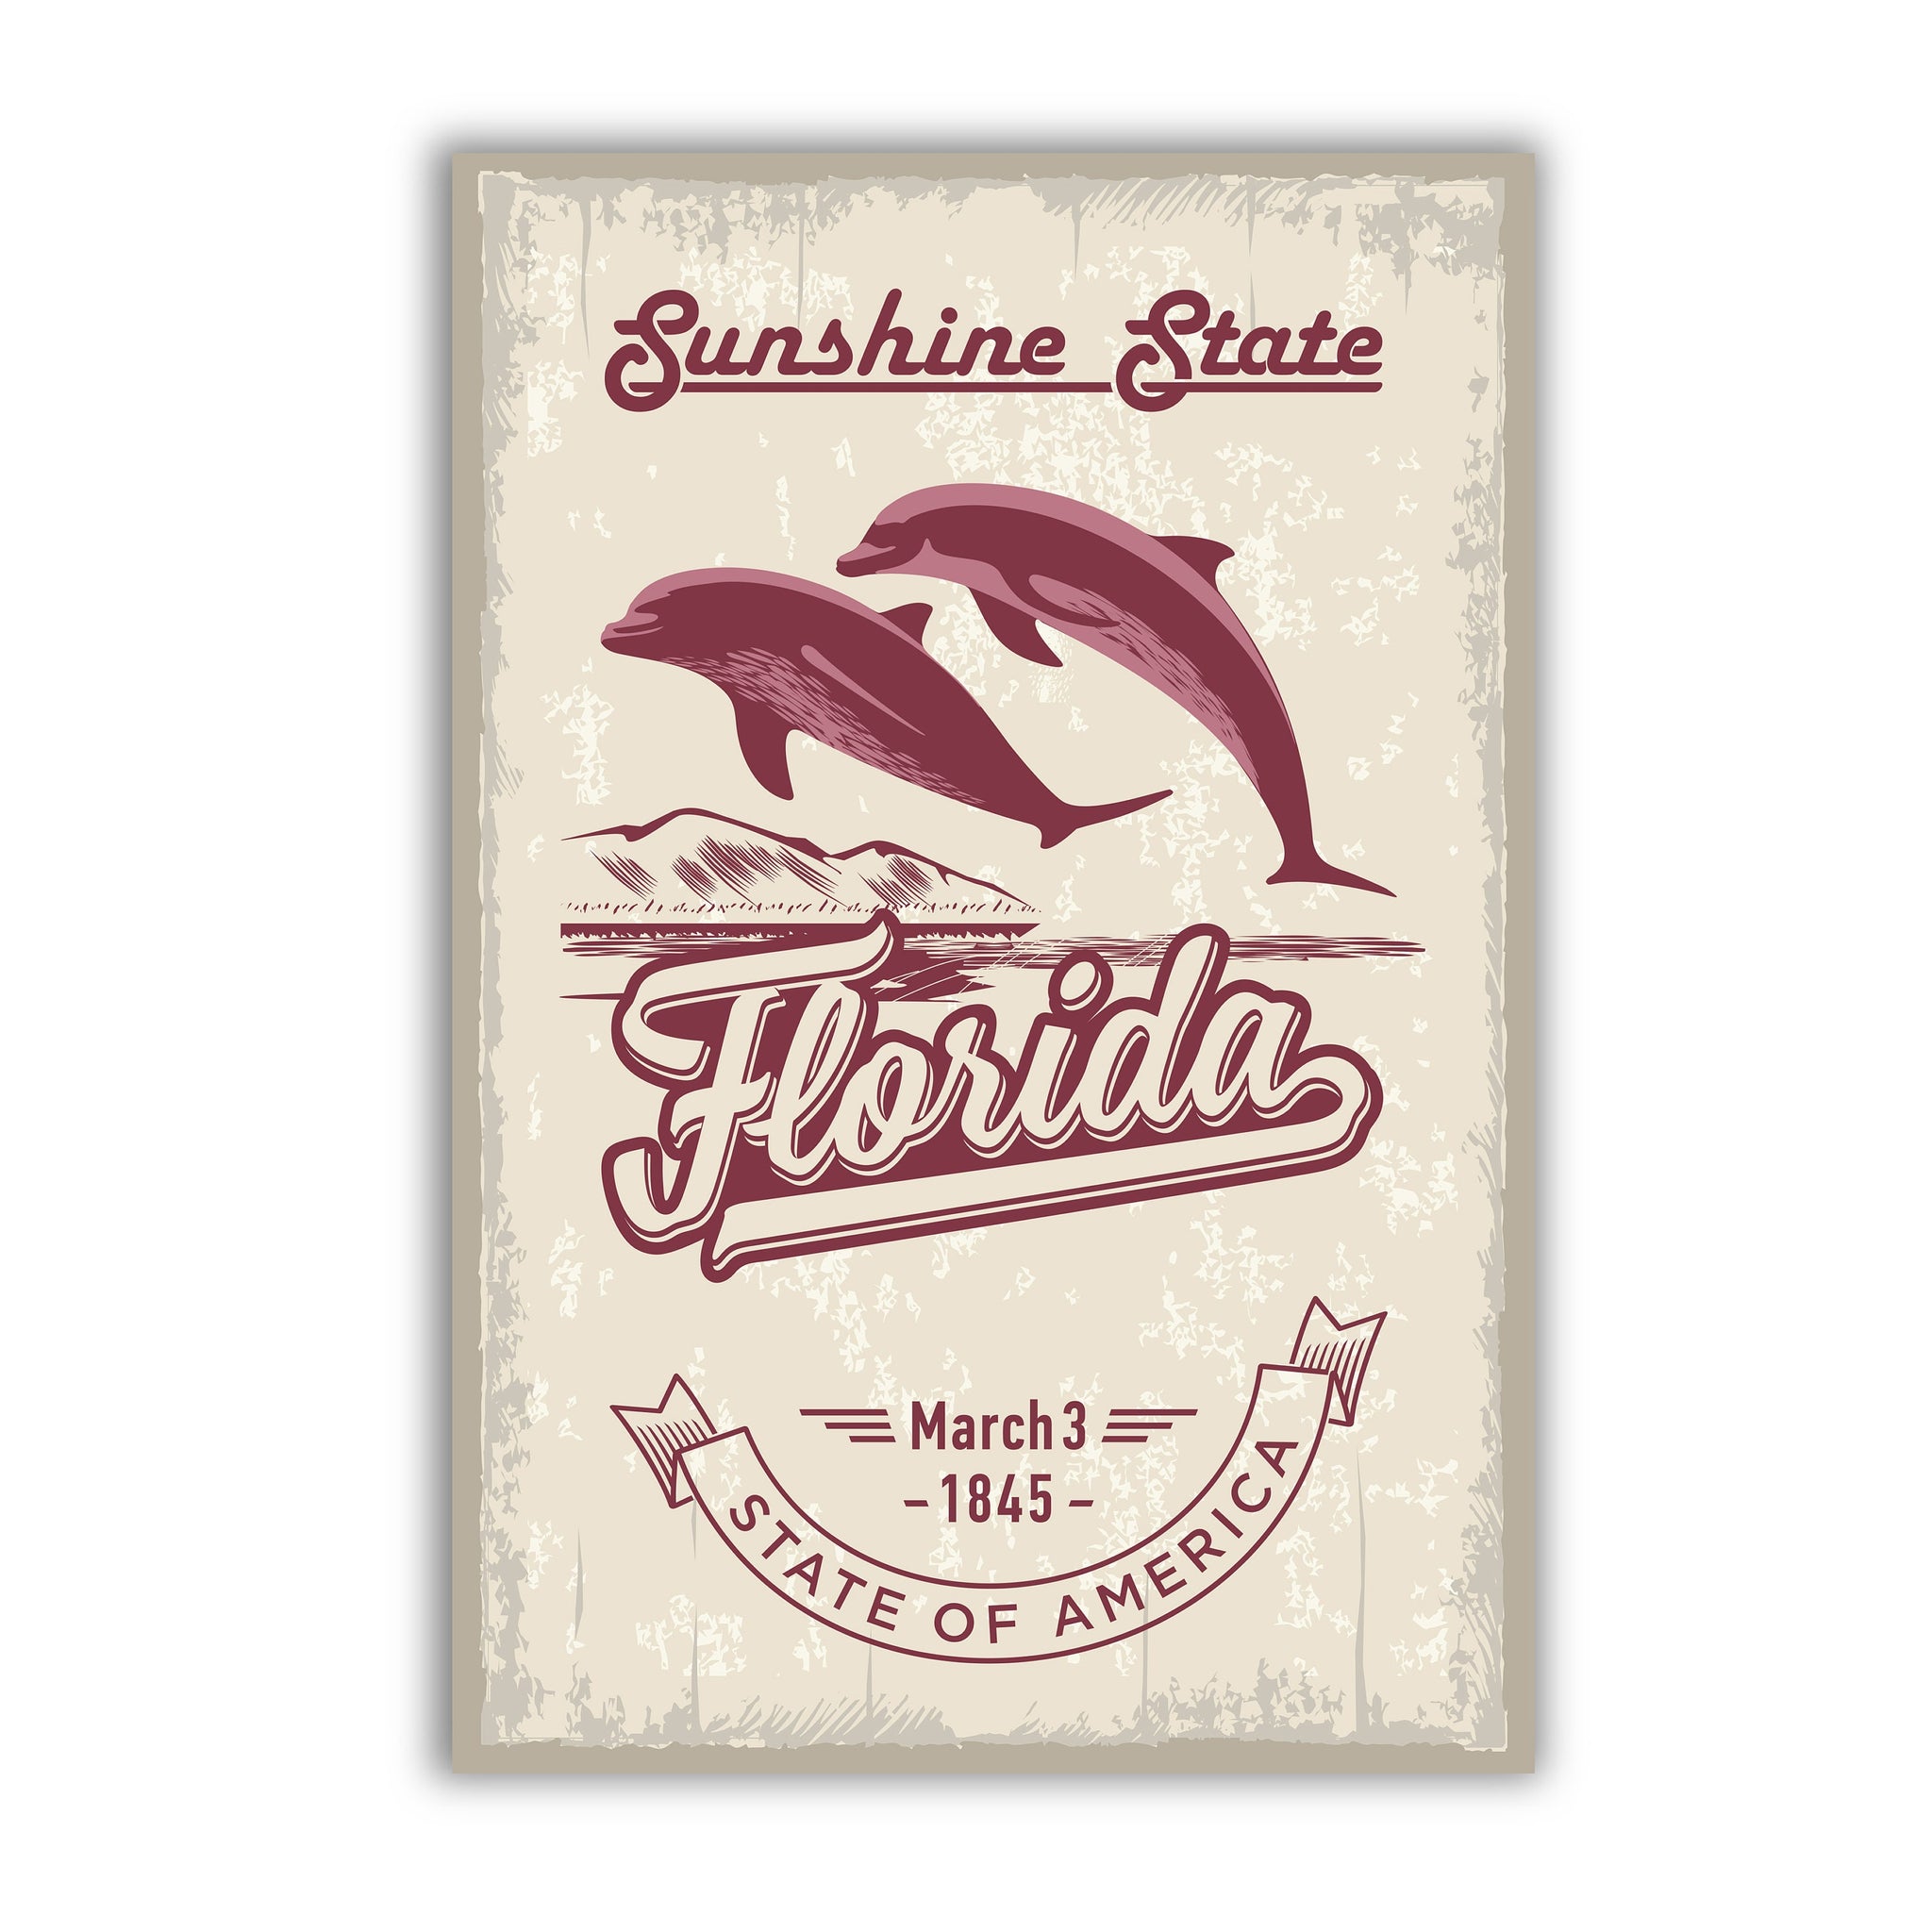 Florida State Symbol Poster, Florida State Poster Print, Florida State Emblem Poster, Retro Travel State Poster, Home and Office Wall Art